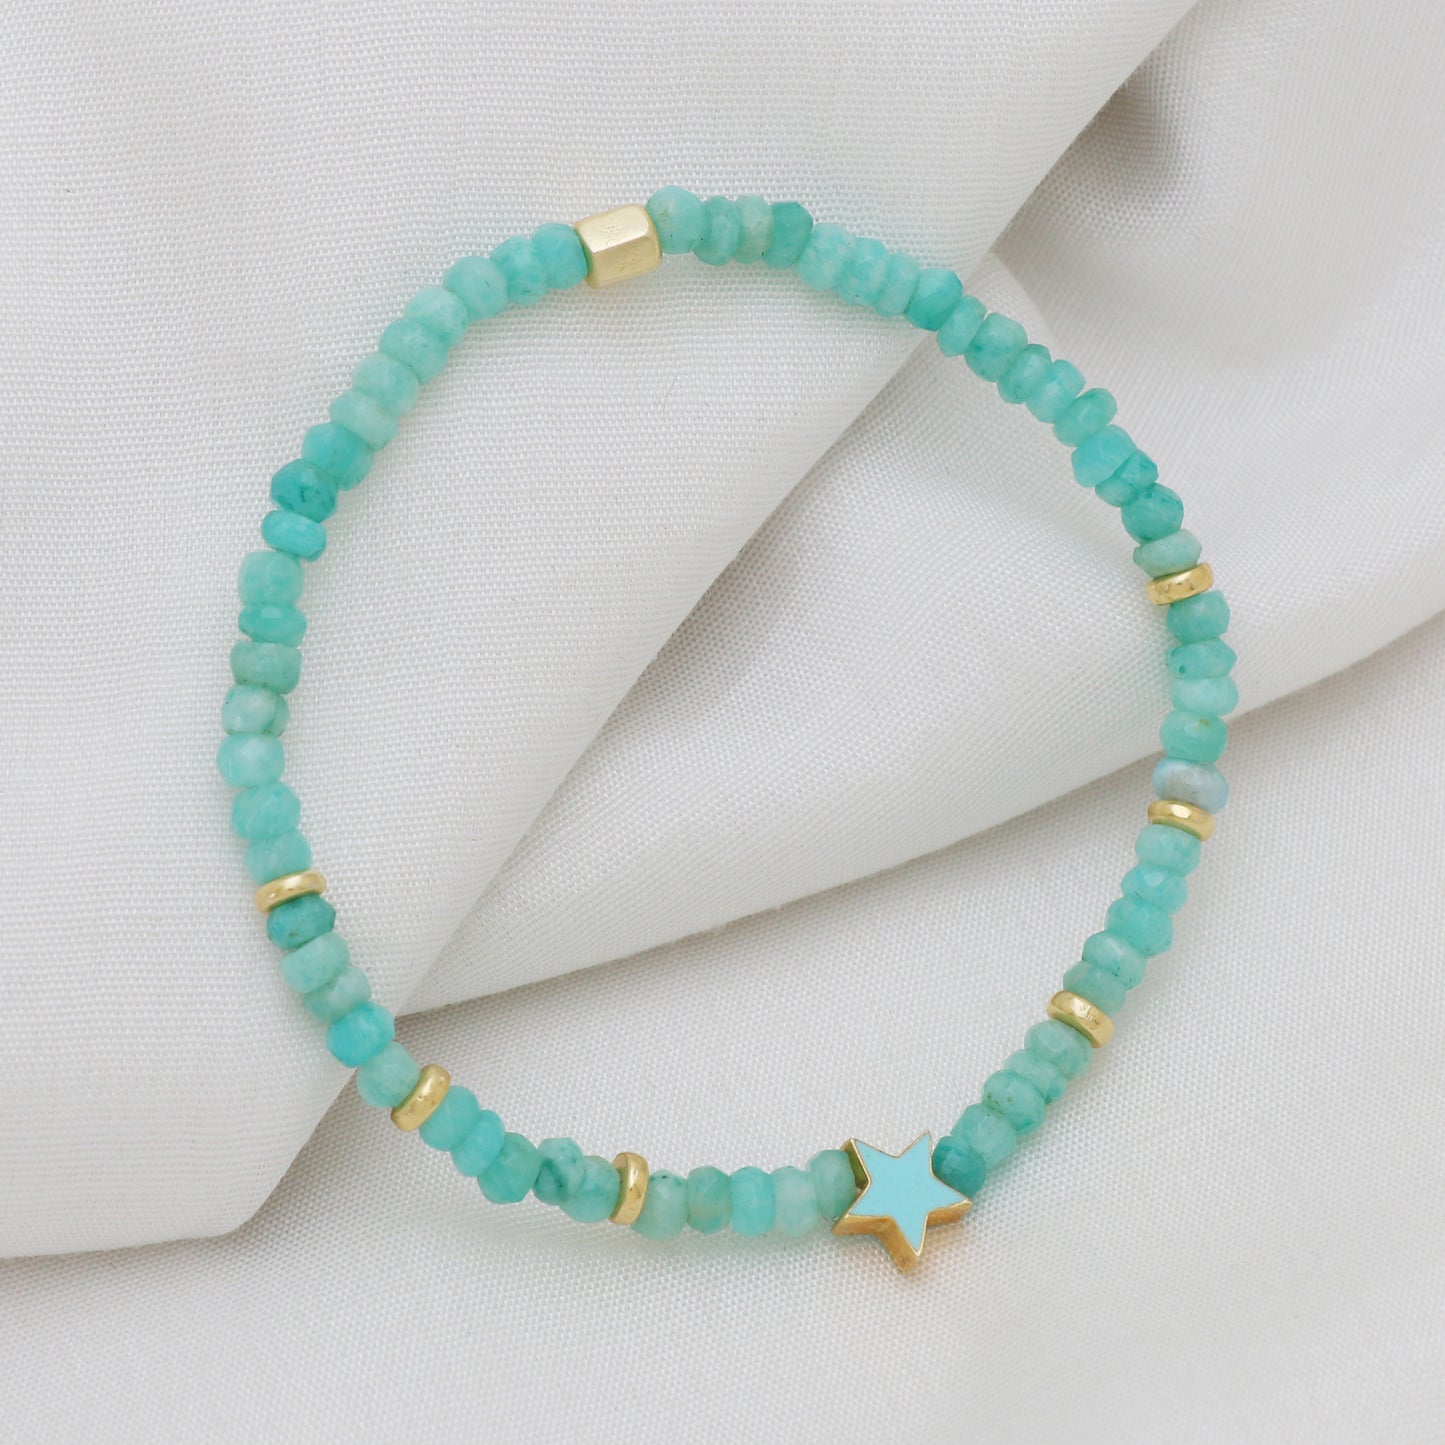 Amazonite star charm stretch bracelet with blue enamel and in gold plated 925 sterling silver